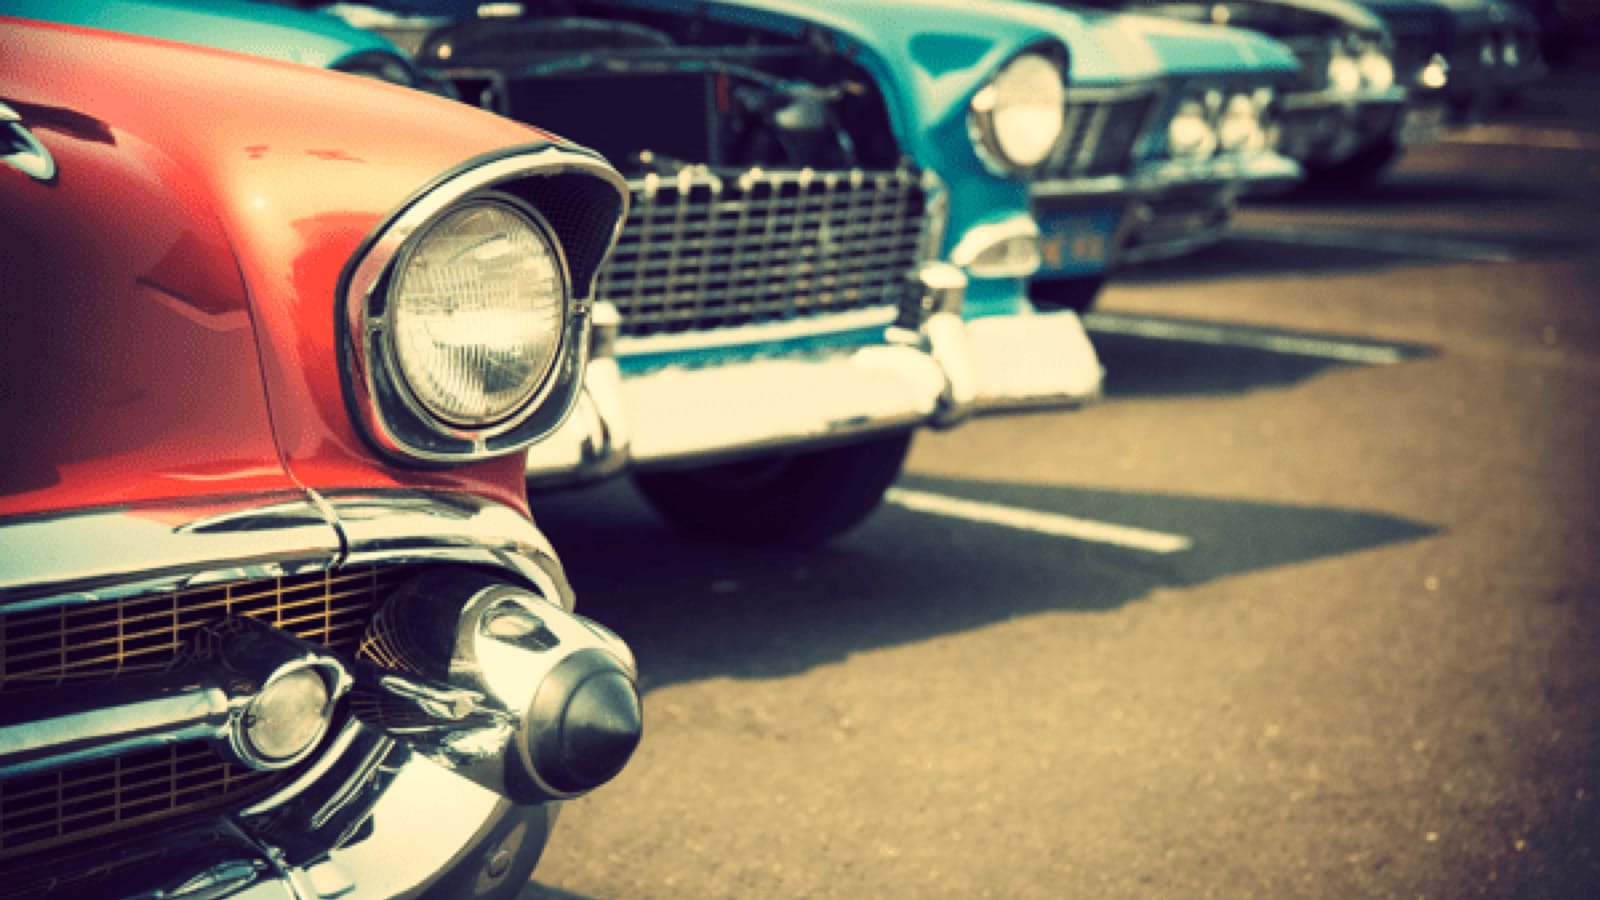 Line of classic cars in a parking lot